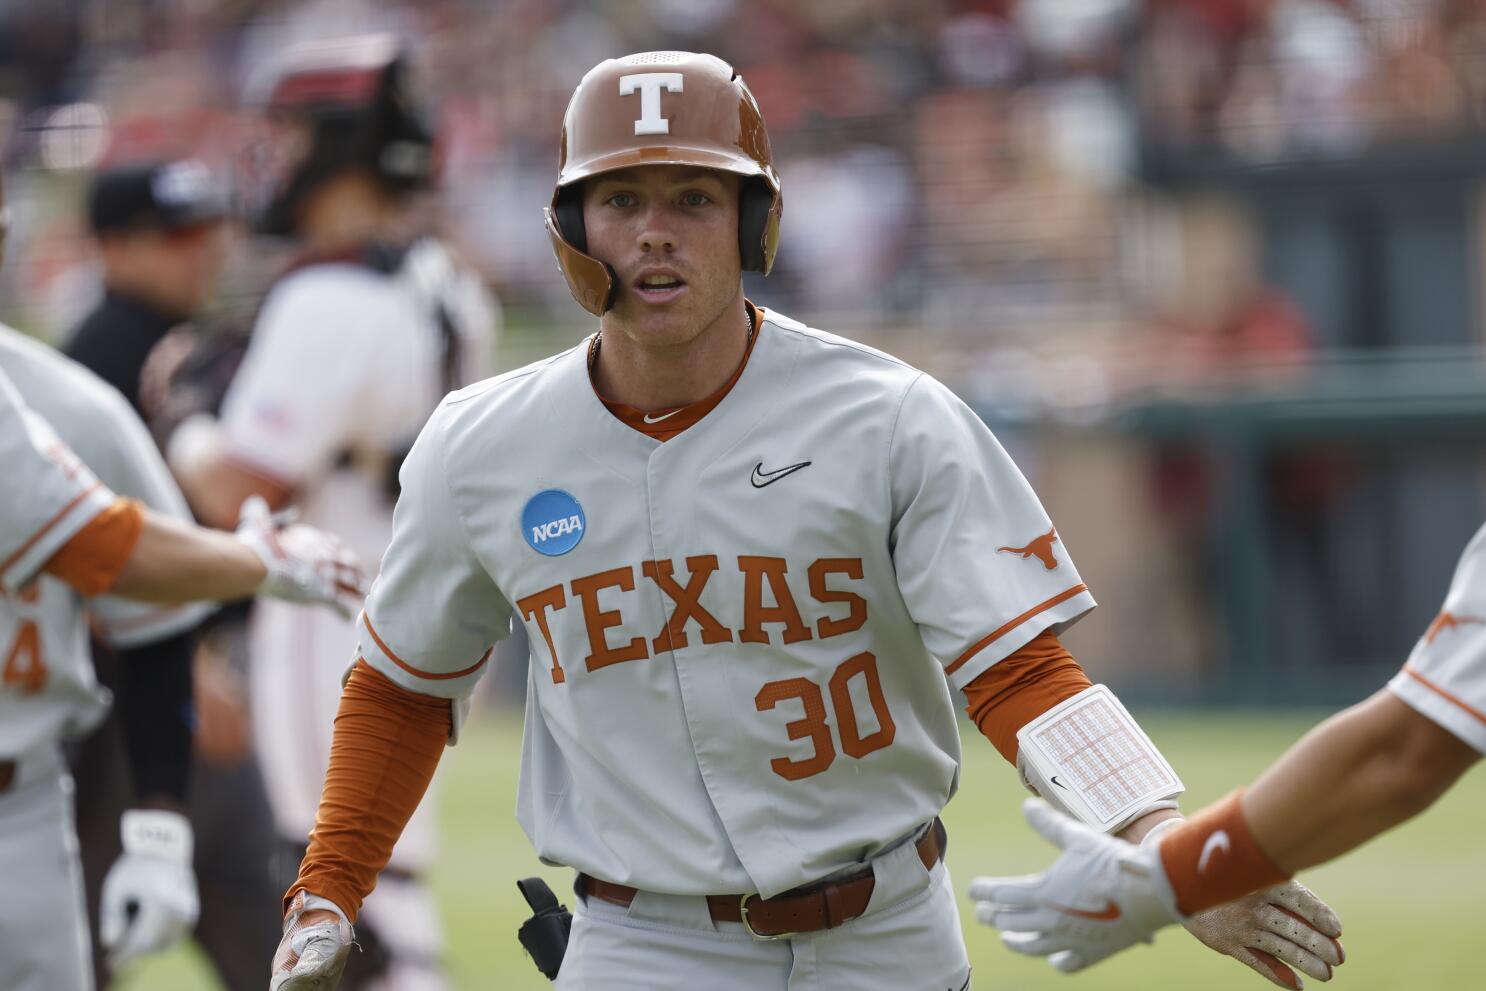 UM baseball crushed by Texas in third inning as visiting Longhorns